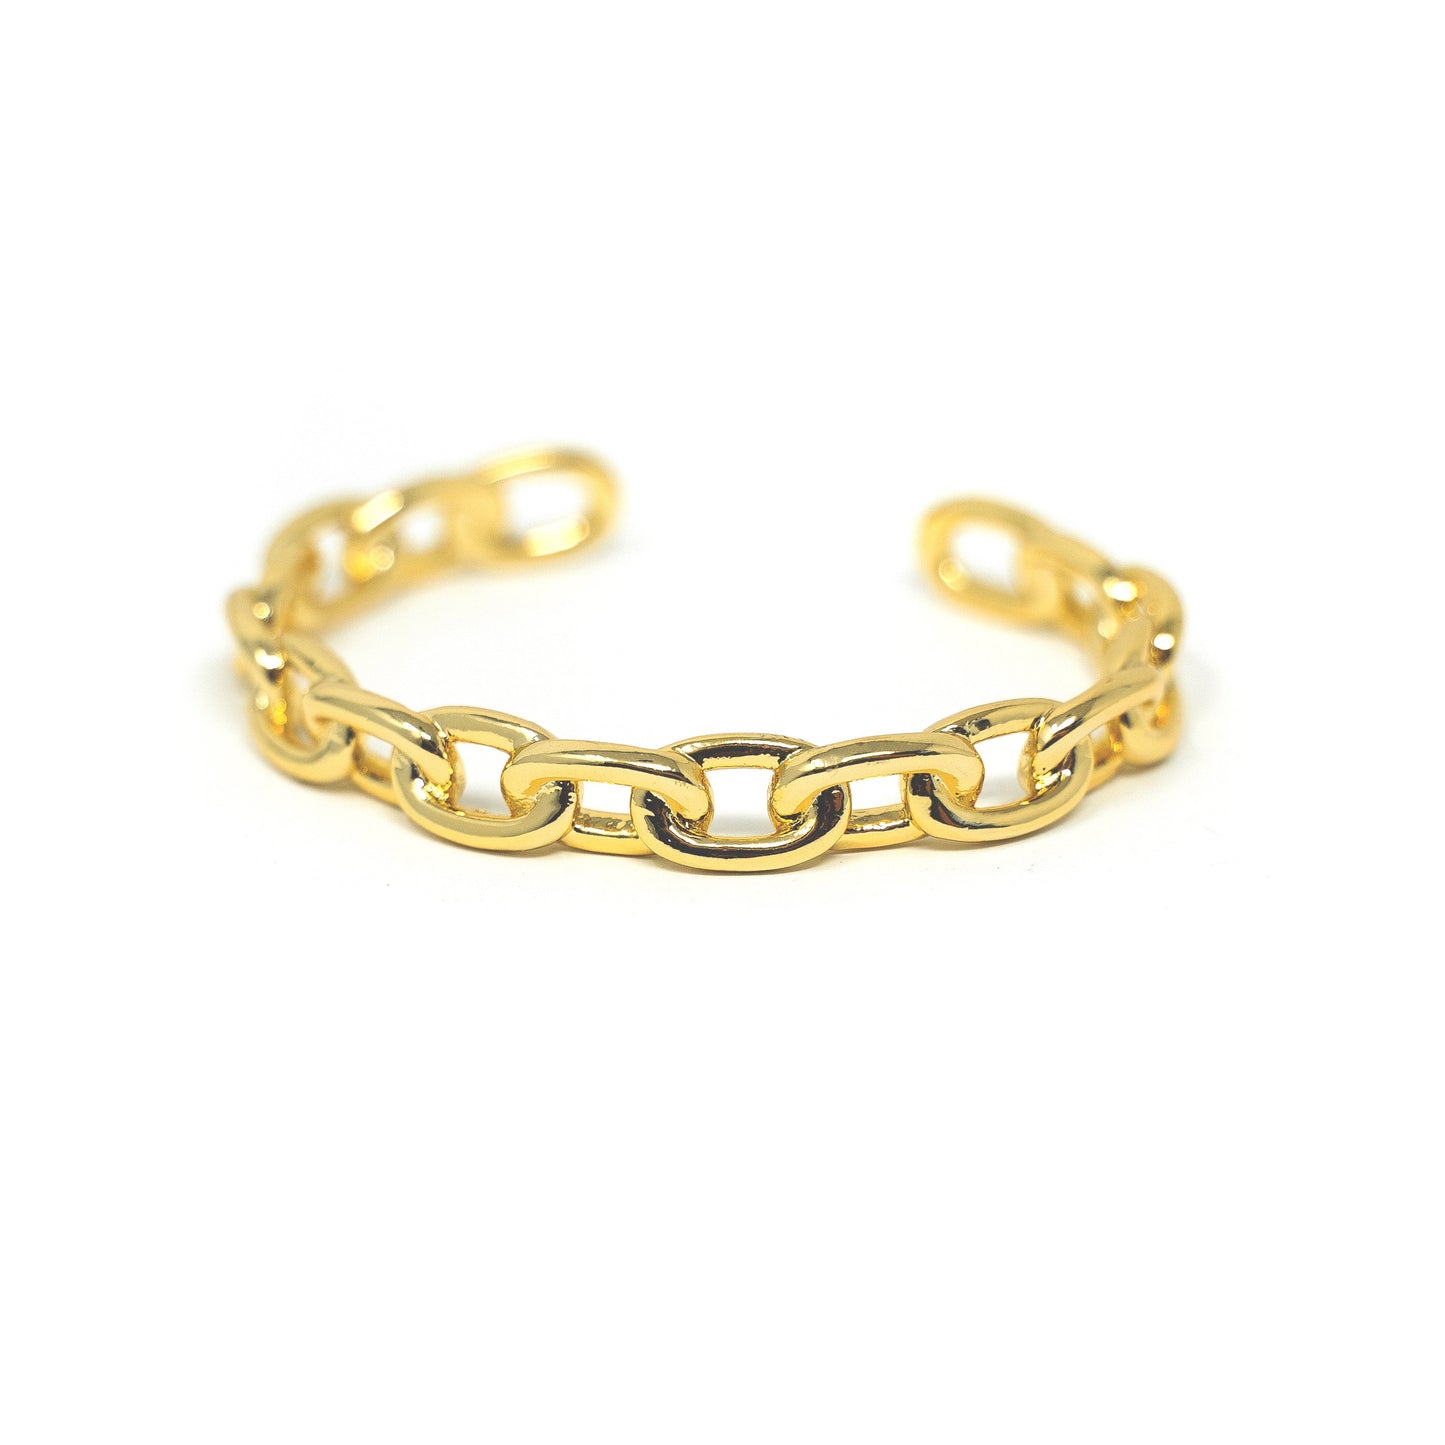 Gold Chain Link Cuff JEWELRY The Sis Kiss Anchor Chain